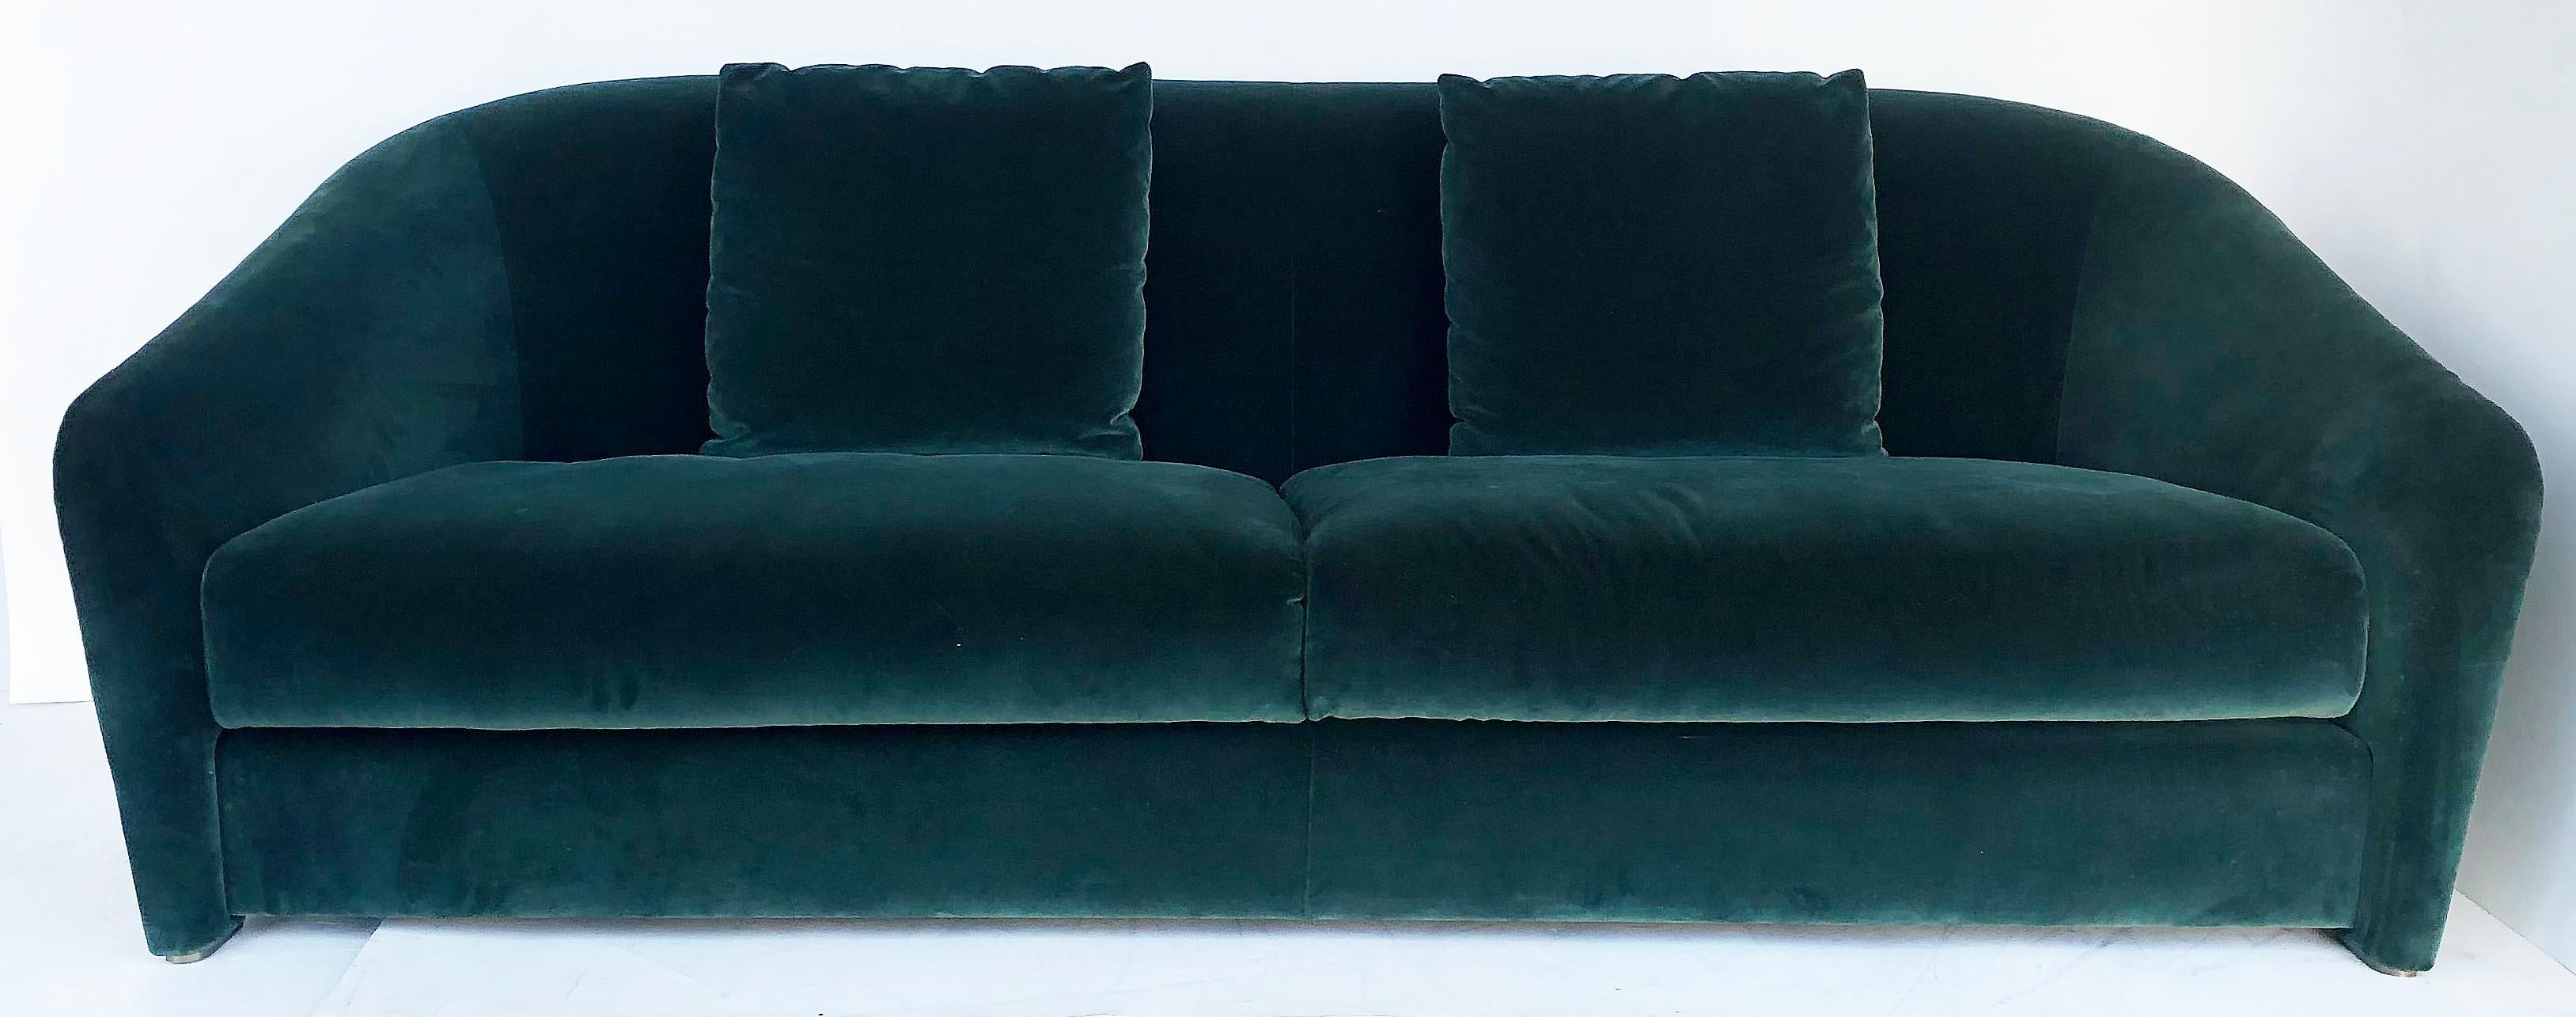 Fendi Casa over scale emerald green silk velvet sofa

Offered for sale is a Fendi Casa over scale, emerald green upholstered silk velvet sofa with two loose seat cushions. The sofa has a tall upholstered back and two loose cushions. The poly/down